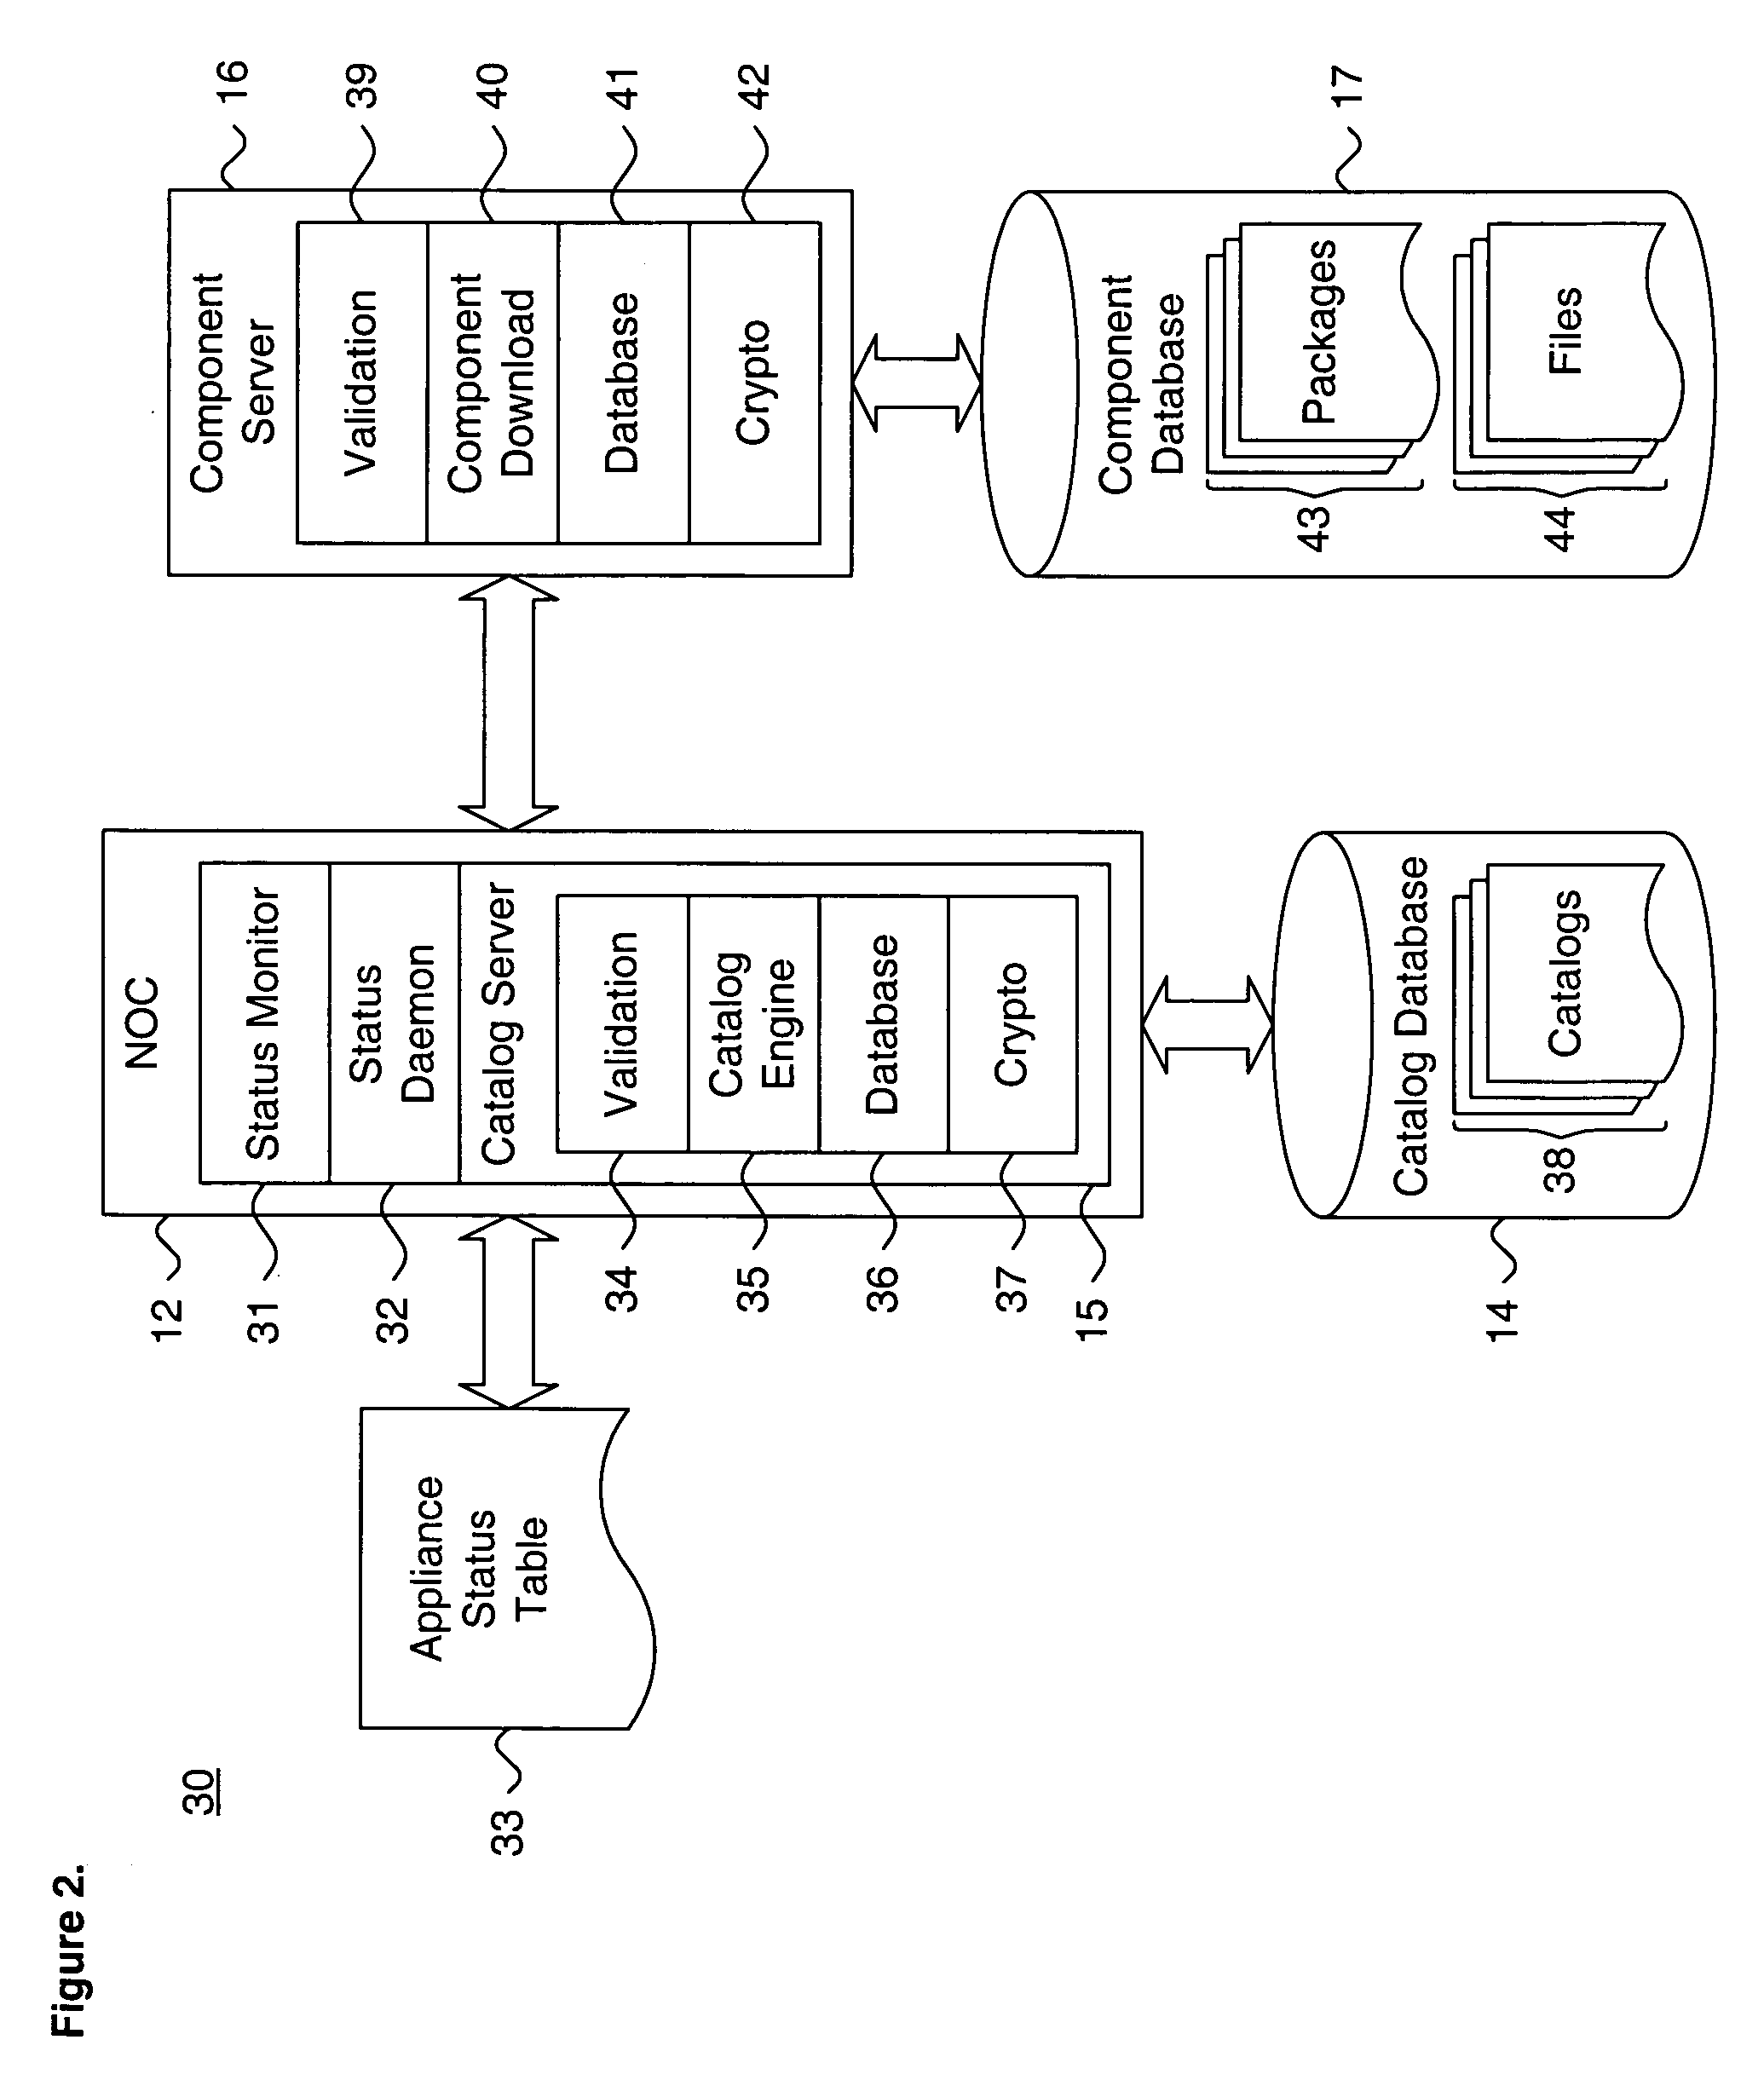 System and method for providing a framework for network appliance management in a distributed computing environment